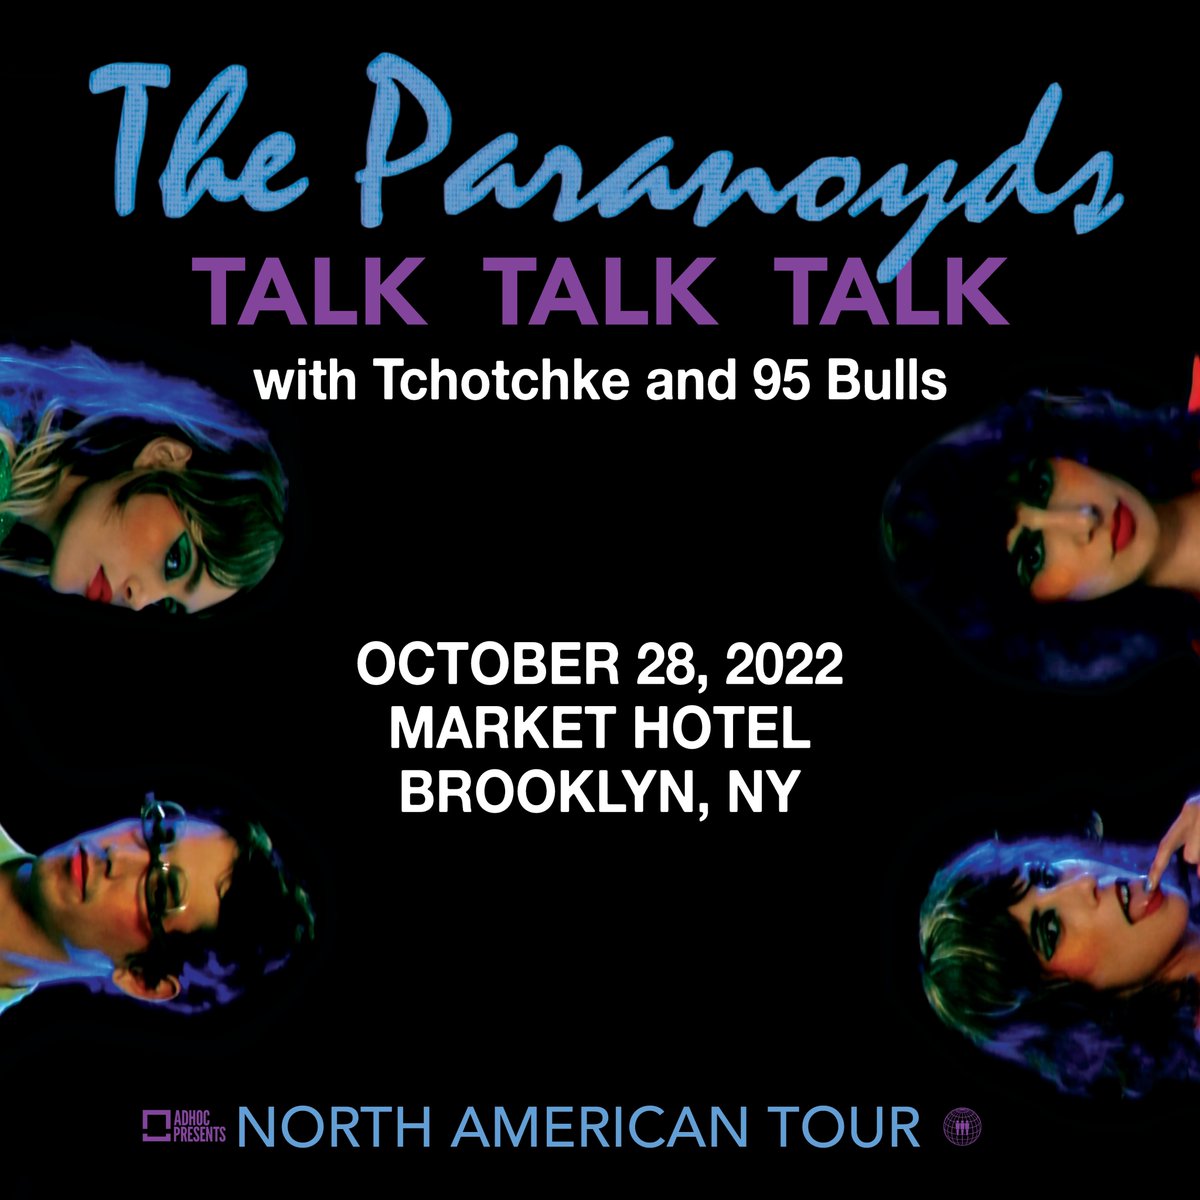 giveaway alert! our pals at @ohmyrockness are giving away 2 tickets to @theparanoyds911, @tchotchke_music & @95bullsnyc on 10/28 @markethotelnyc! 🔥🙌🙌 enter here: bit.ly/paranoyds-omr